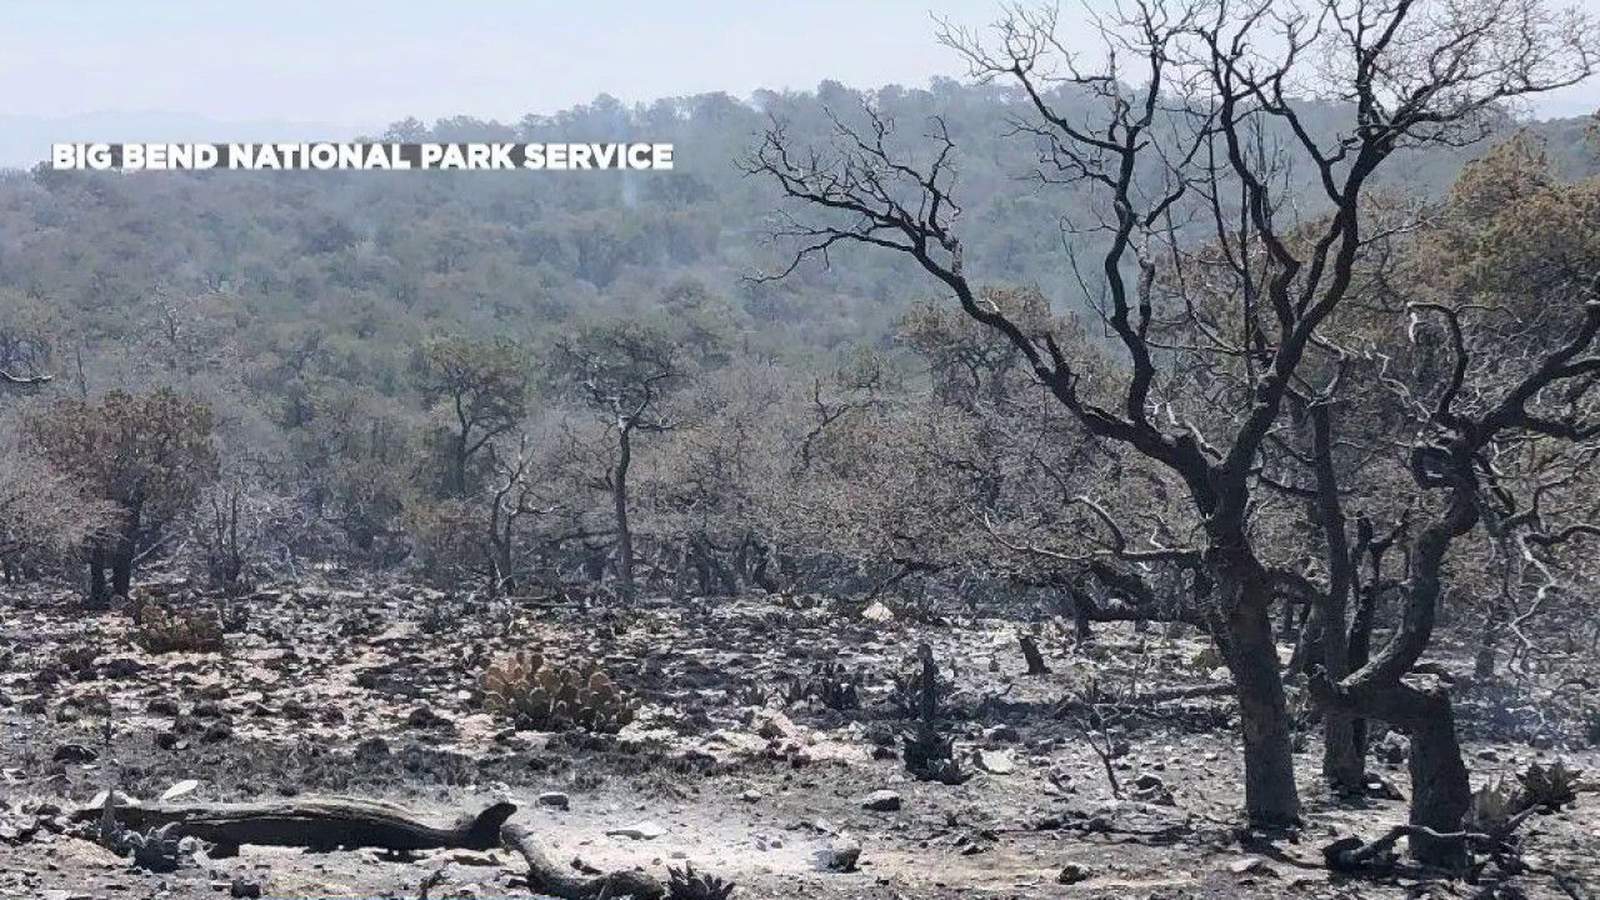 Lower winds, humidity help crews fight Big Bend National Park fire